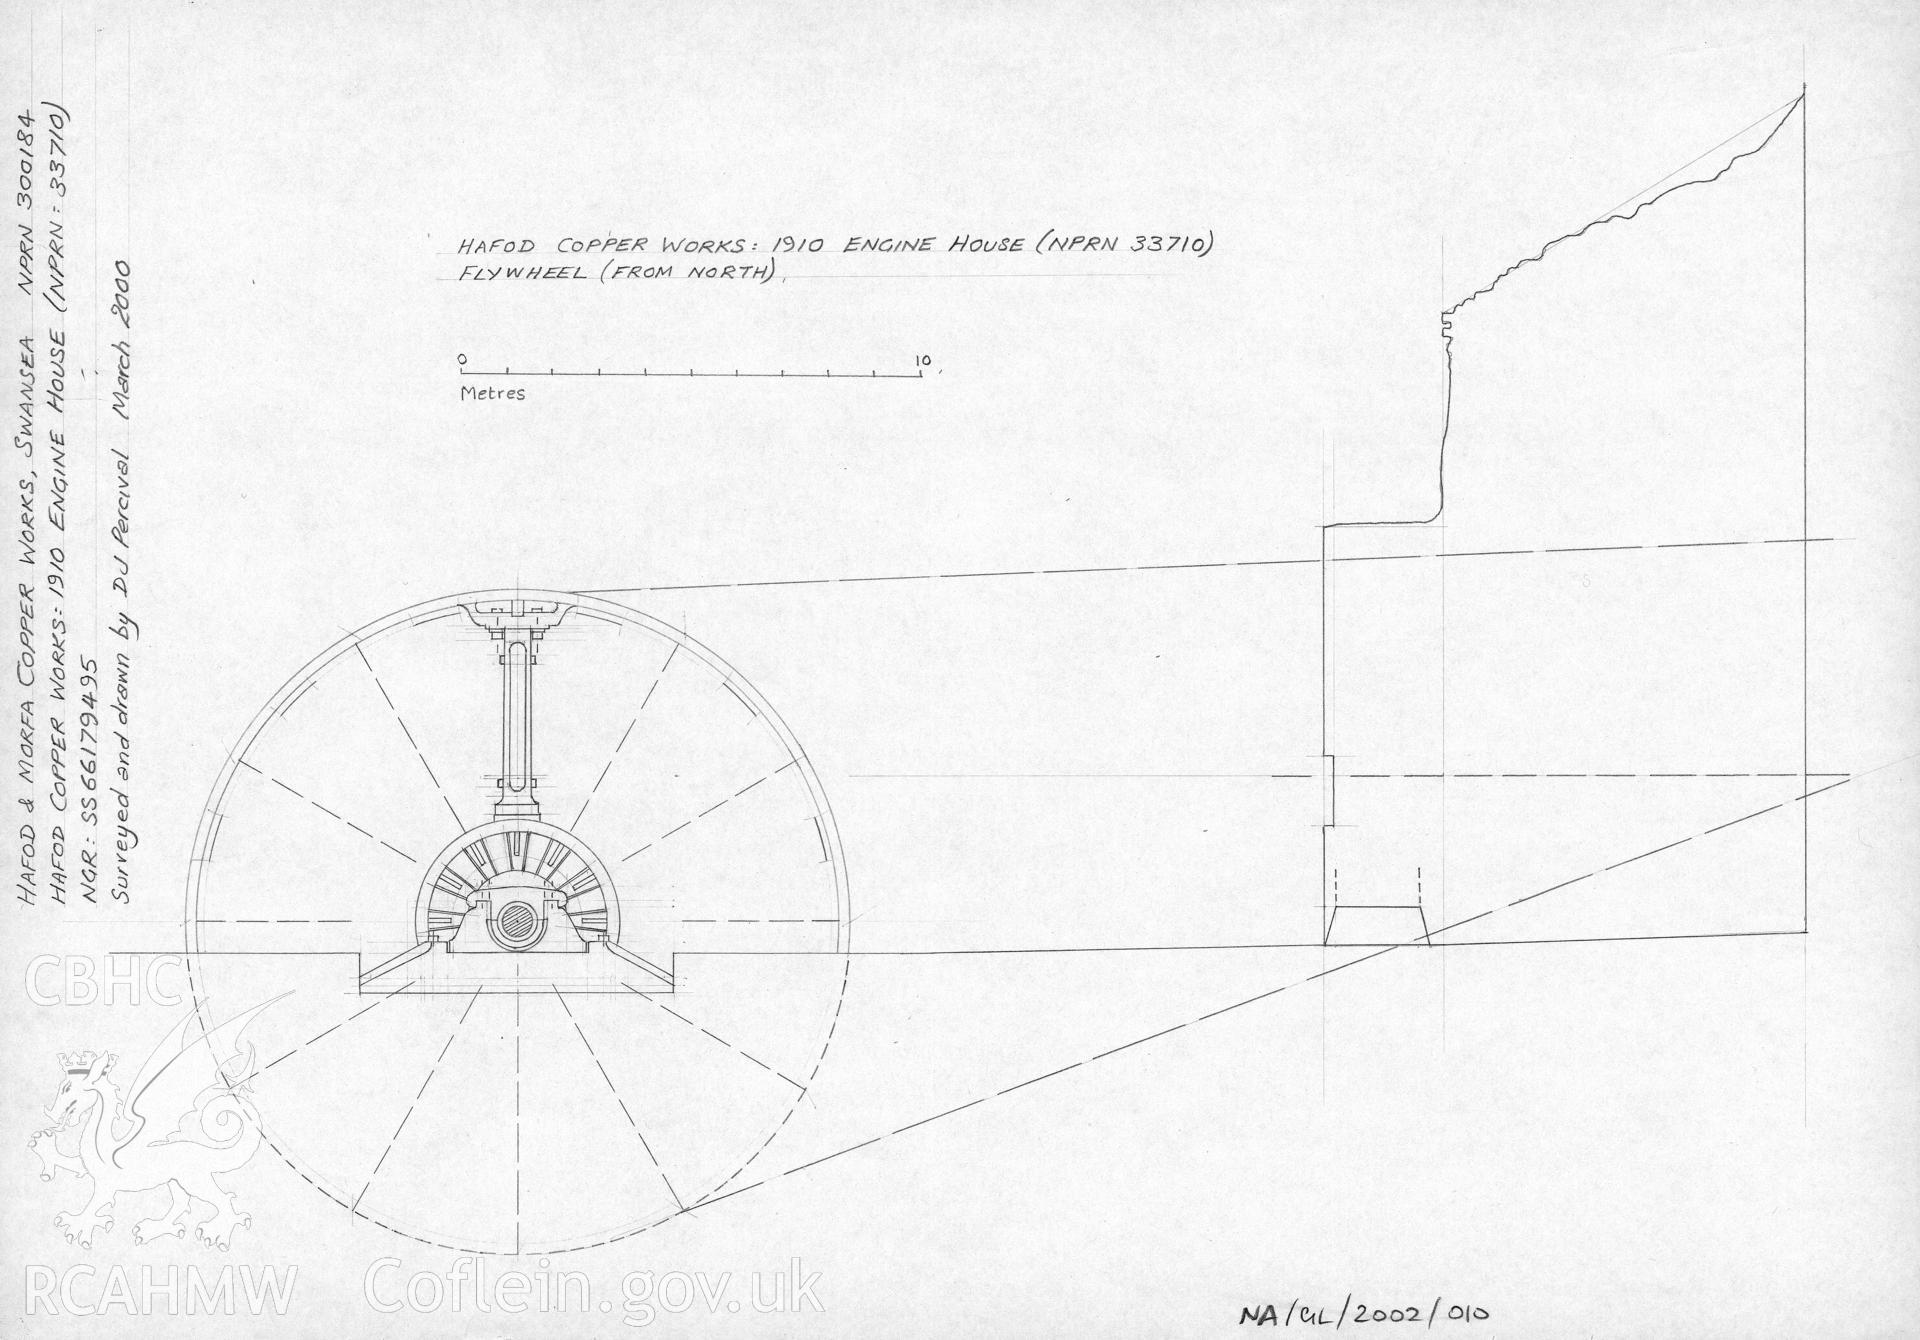 Measured survey comprising drawing of  the 1910 engine house flywheel at Hafod and Morfa Copperworks, drawn by David Percival, March 2000.